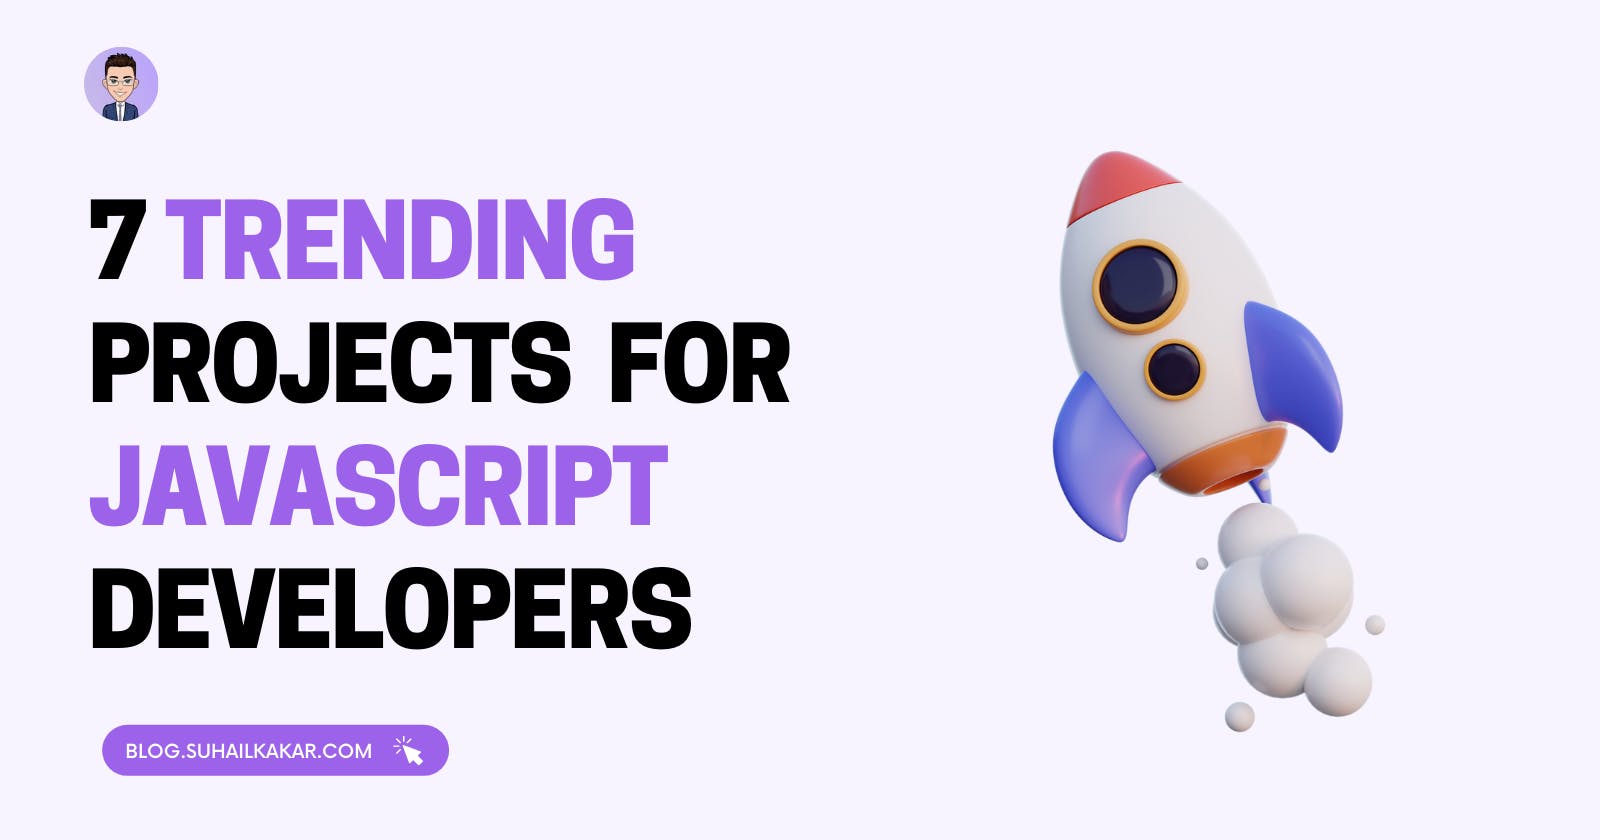 7 Trending projects on GitHub for JavaScript developers